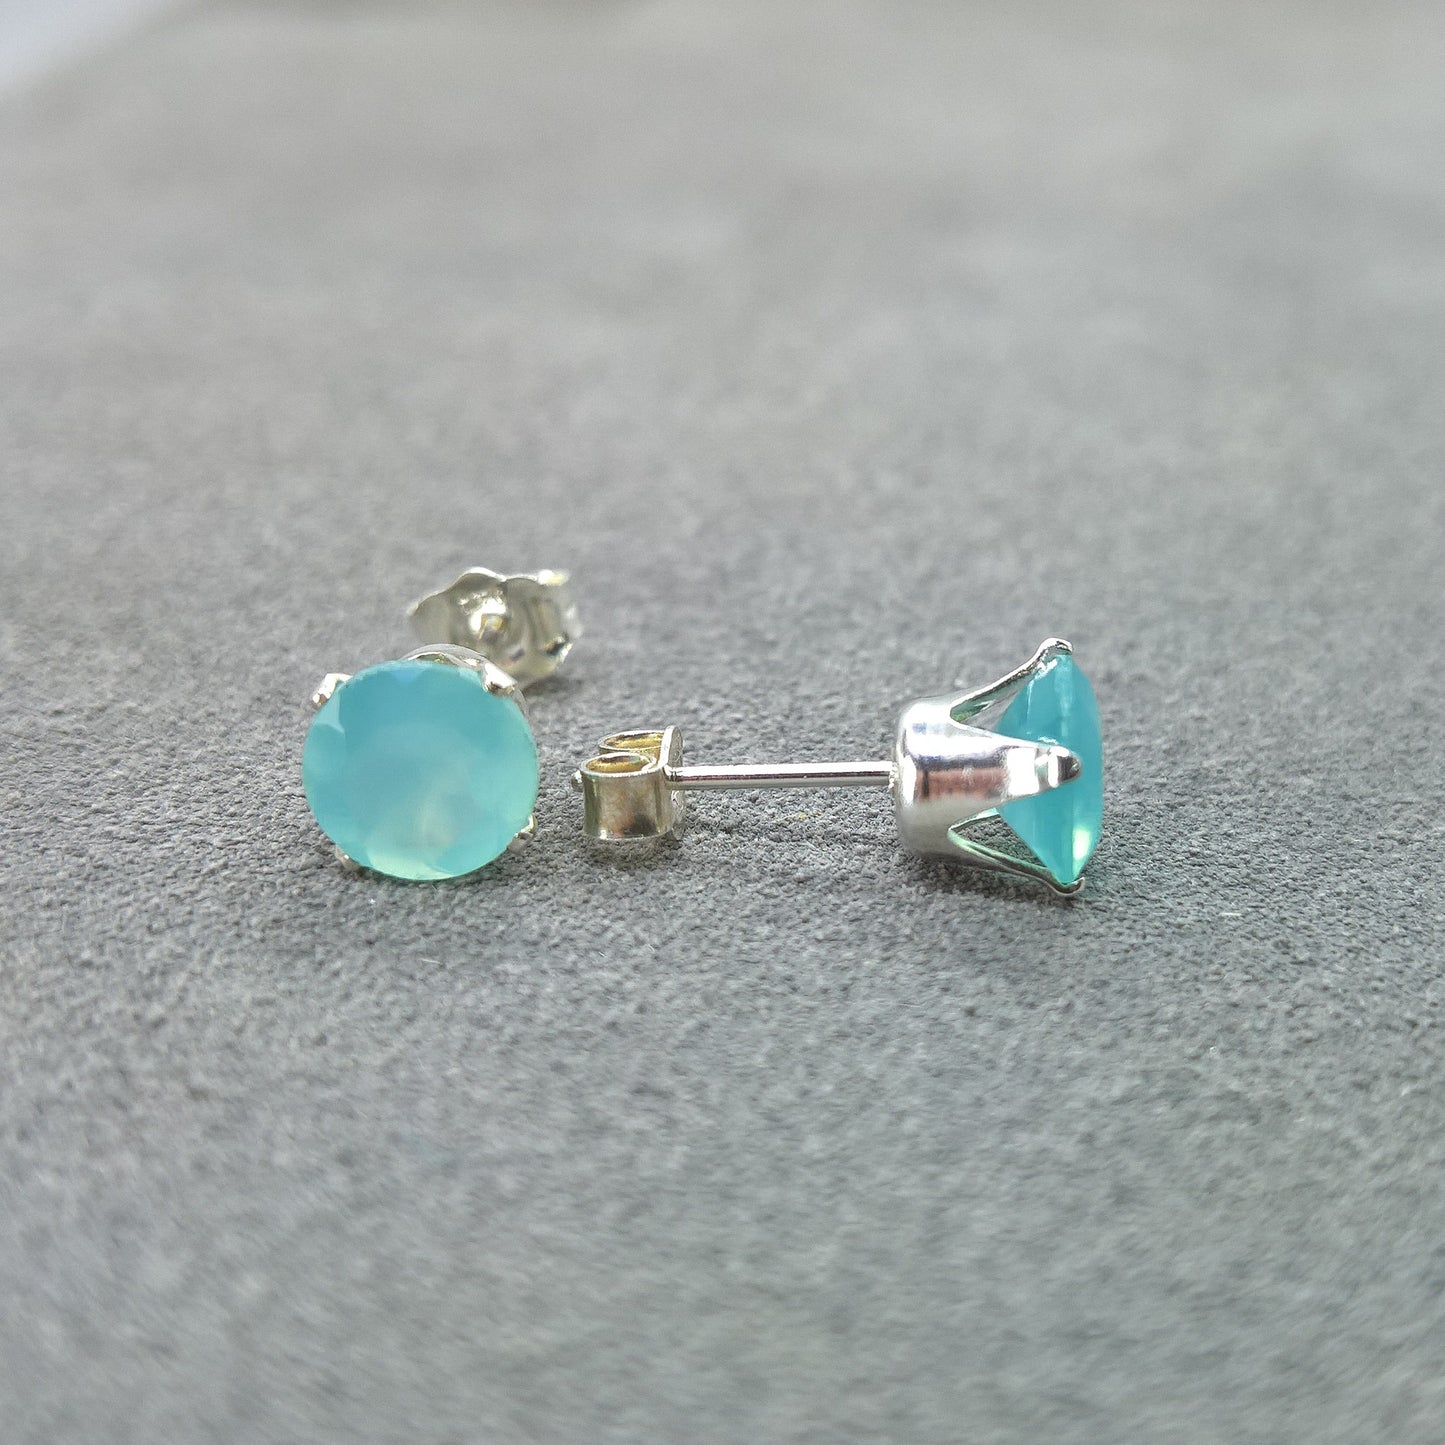 Chalcedony stud earrings in gold filled or sterling silver